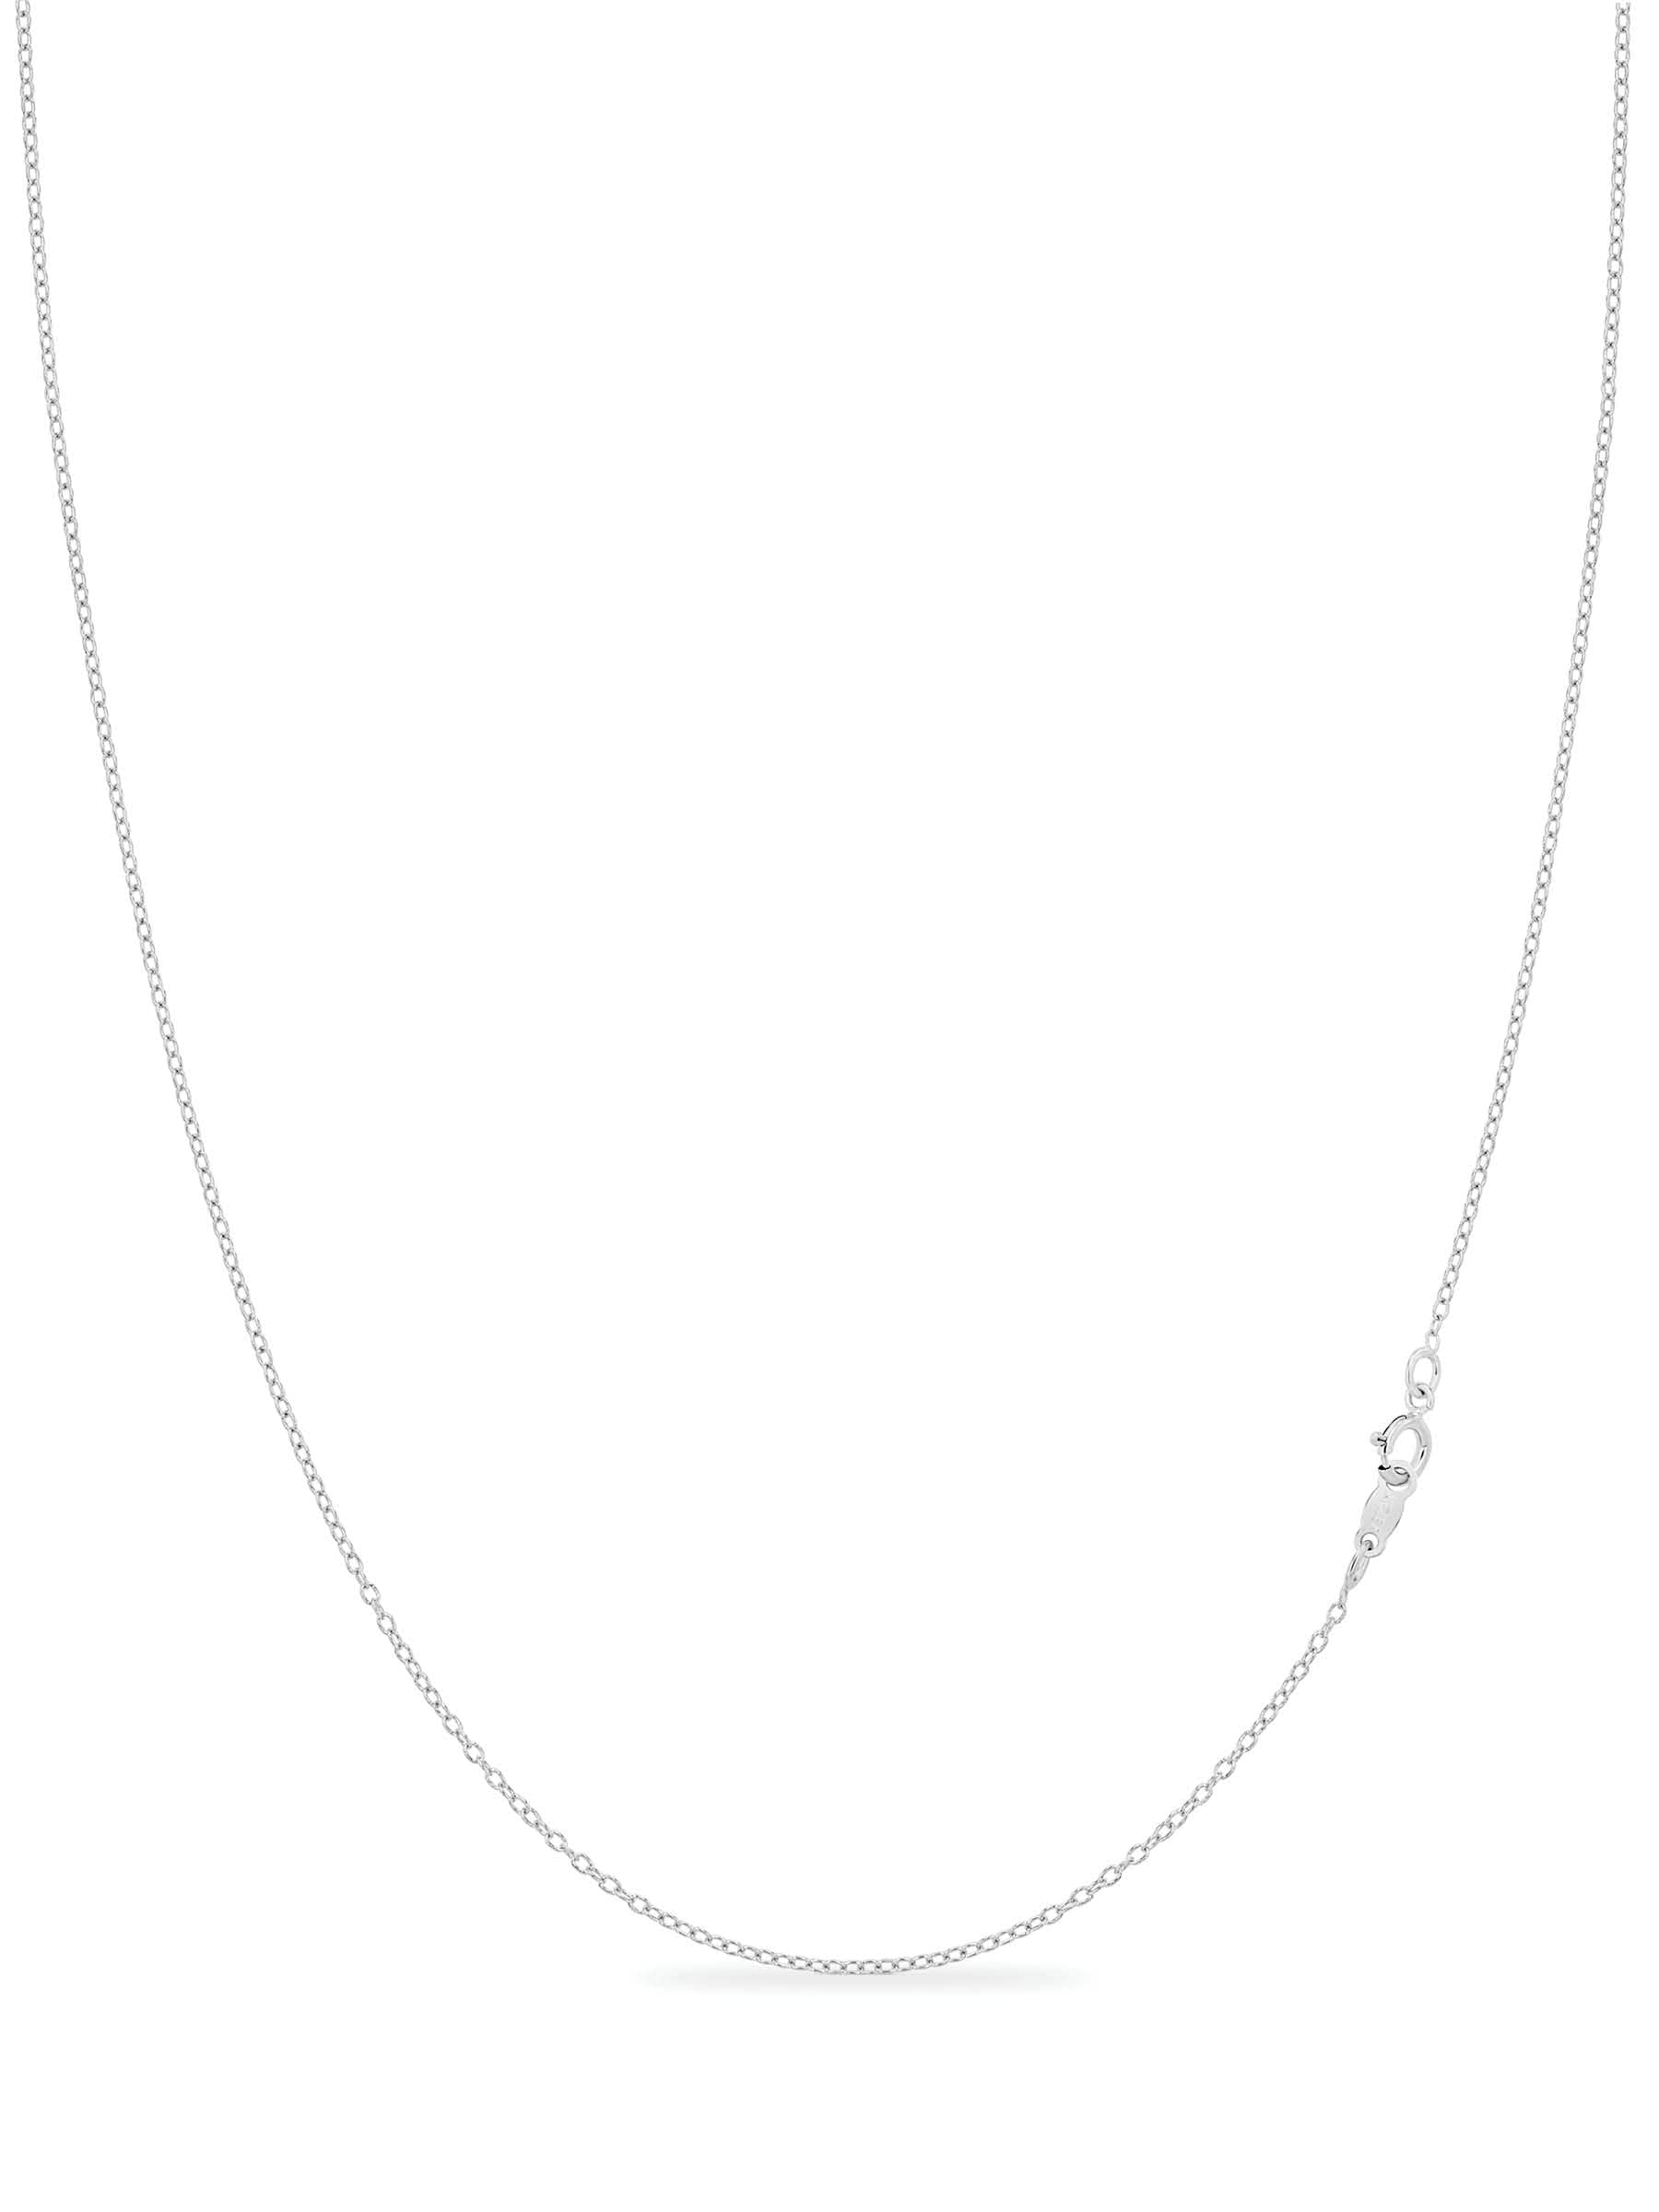 Sterling Silver 1.3mm Fine Open Cable Chain 12" - 36"